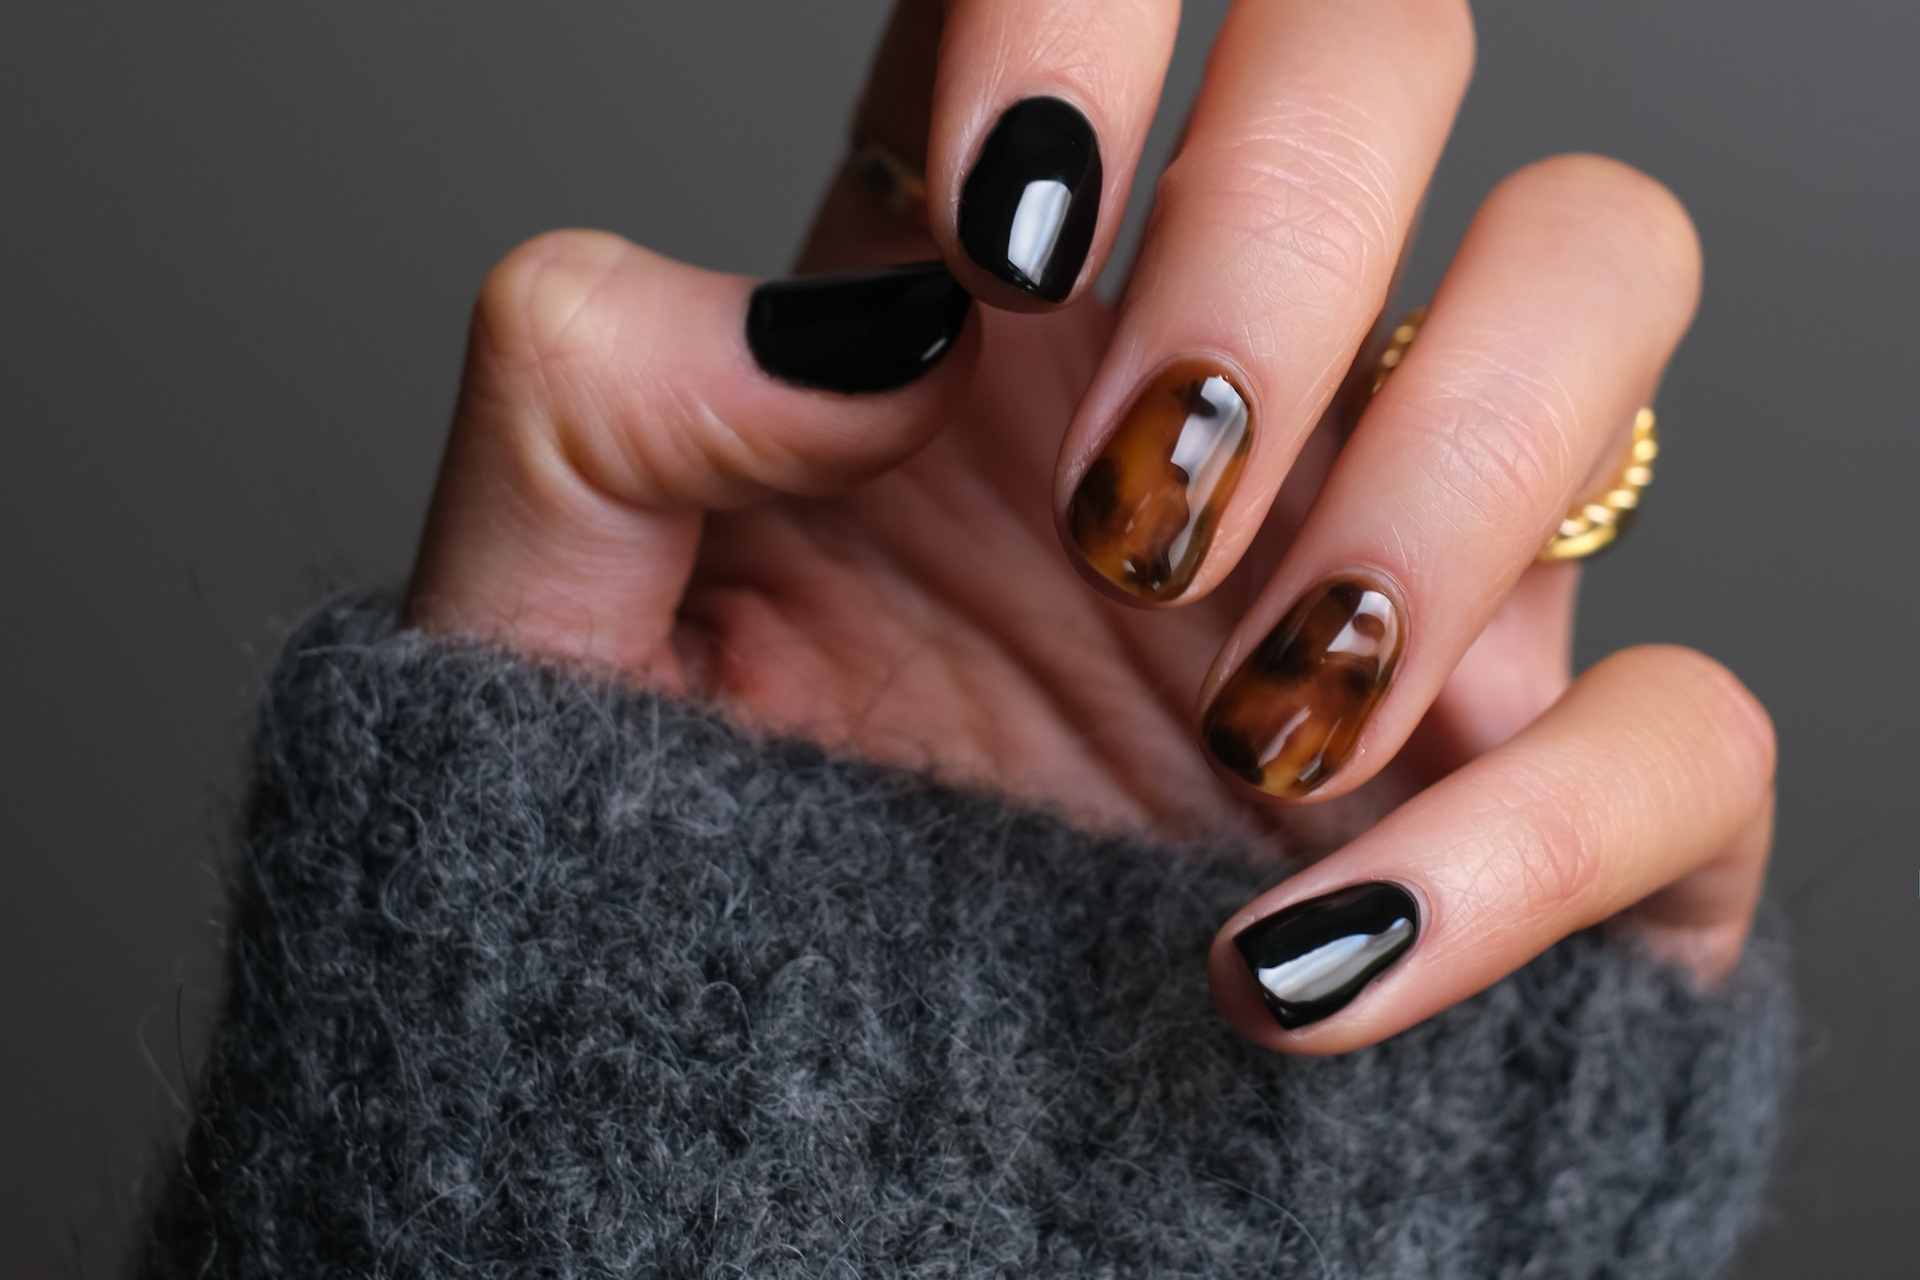 A woman's hand curled into a slight first to display her gel polish manicure where there nails a painted black and two have a tortoise shell print